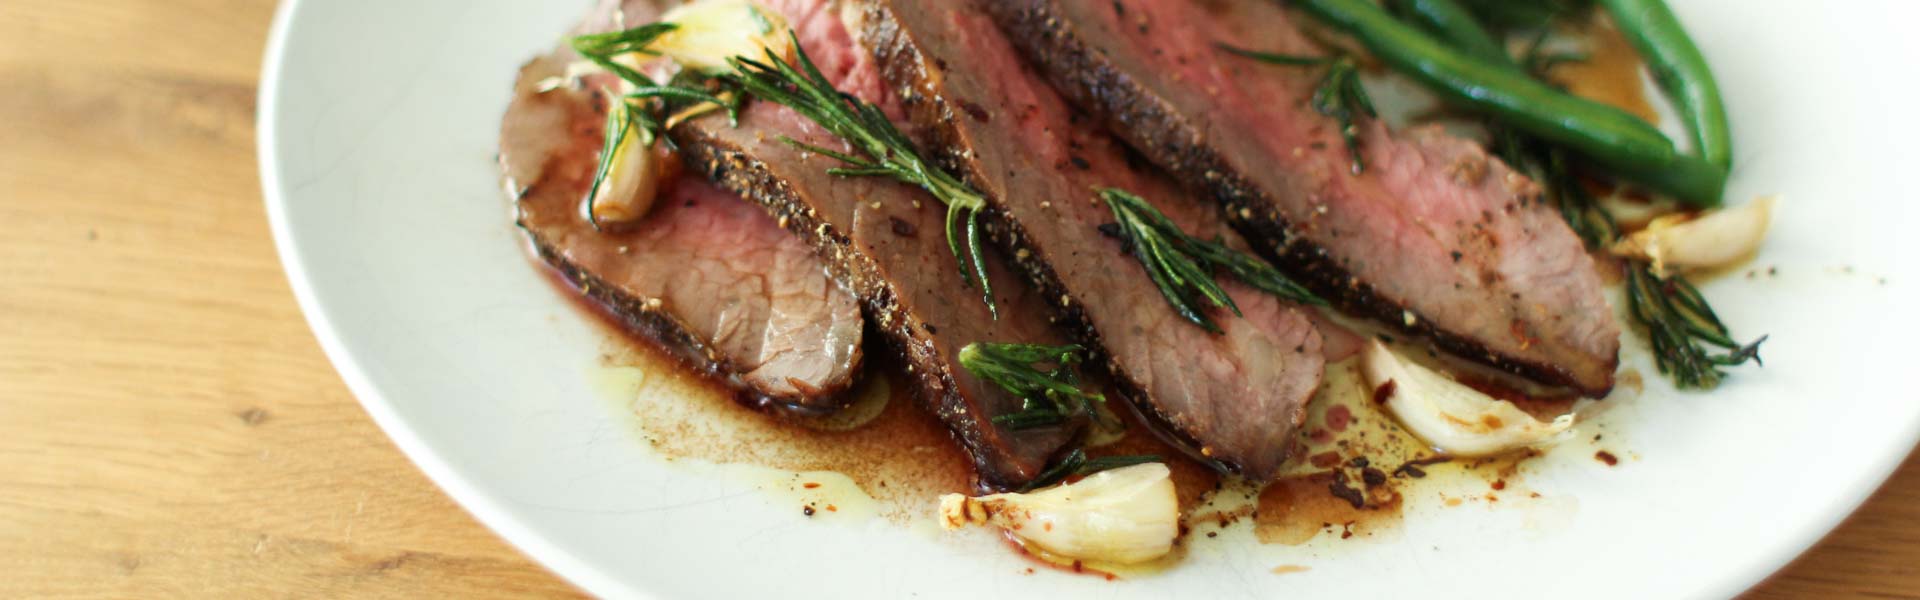 Marinating beef with Dried Plum Puree before roasting gives tri-tip a deep, caramelized exterior.